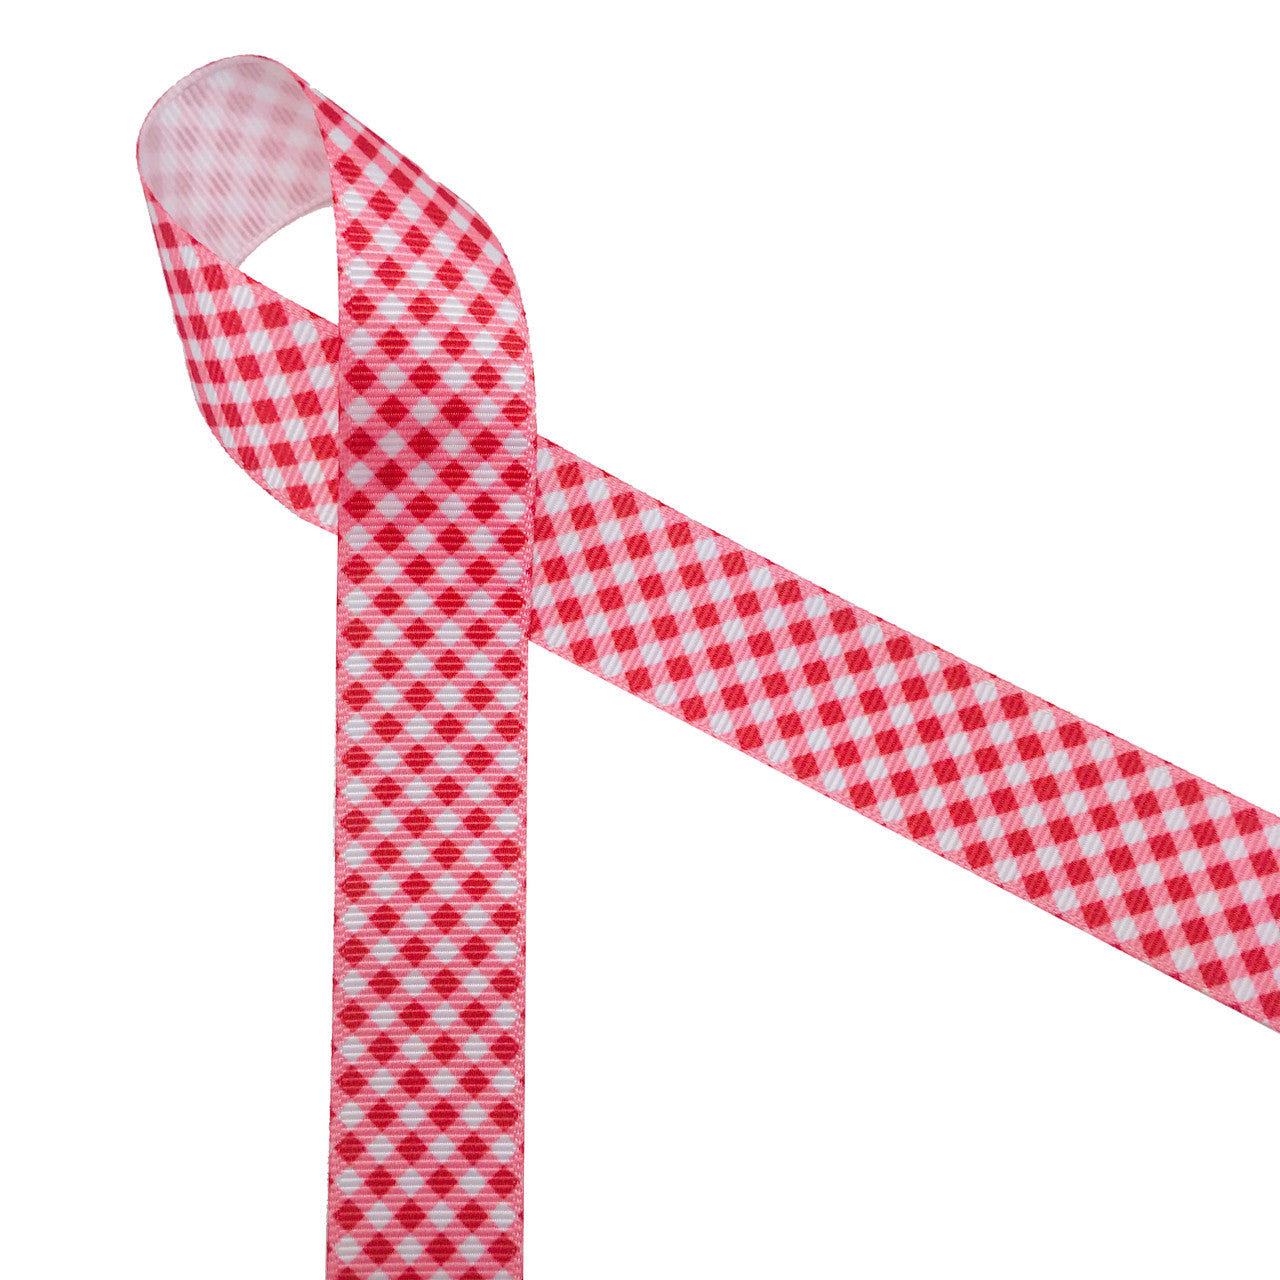 7/8 Red / White Gingham Ribbon - Pre-Tied Twist Tie Bows - 100 Bows/Pack